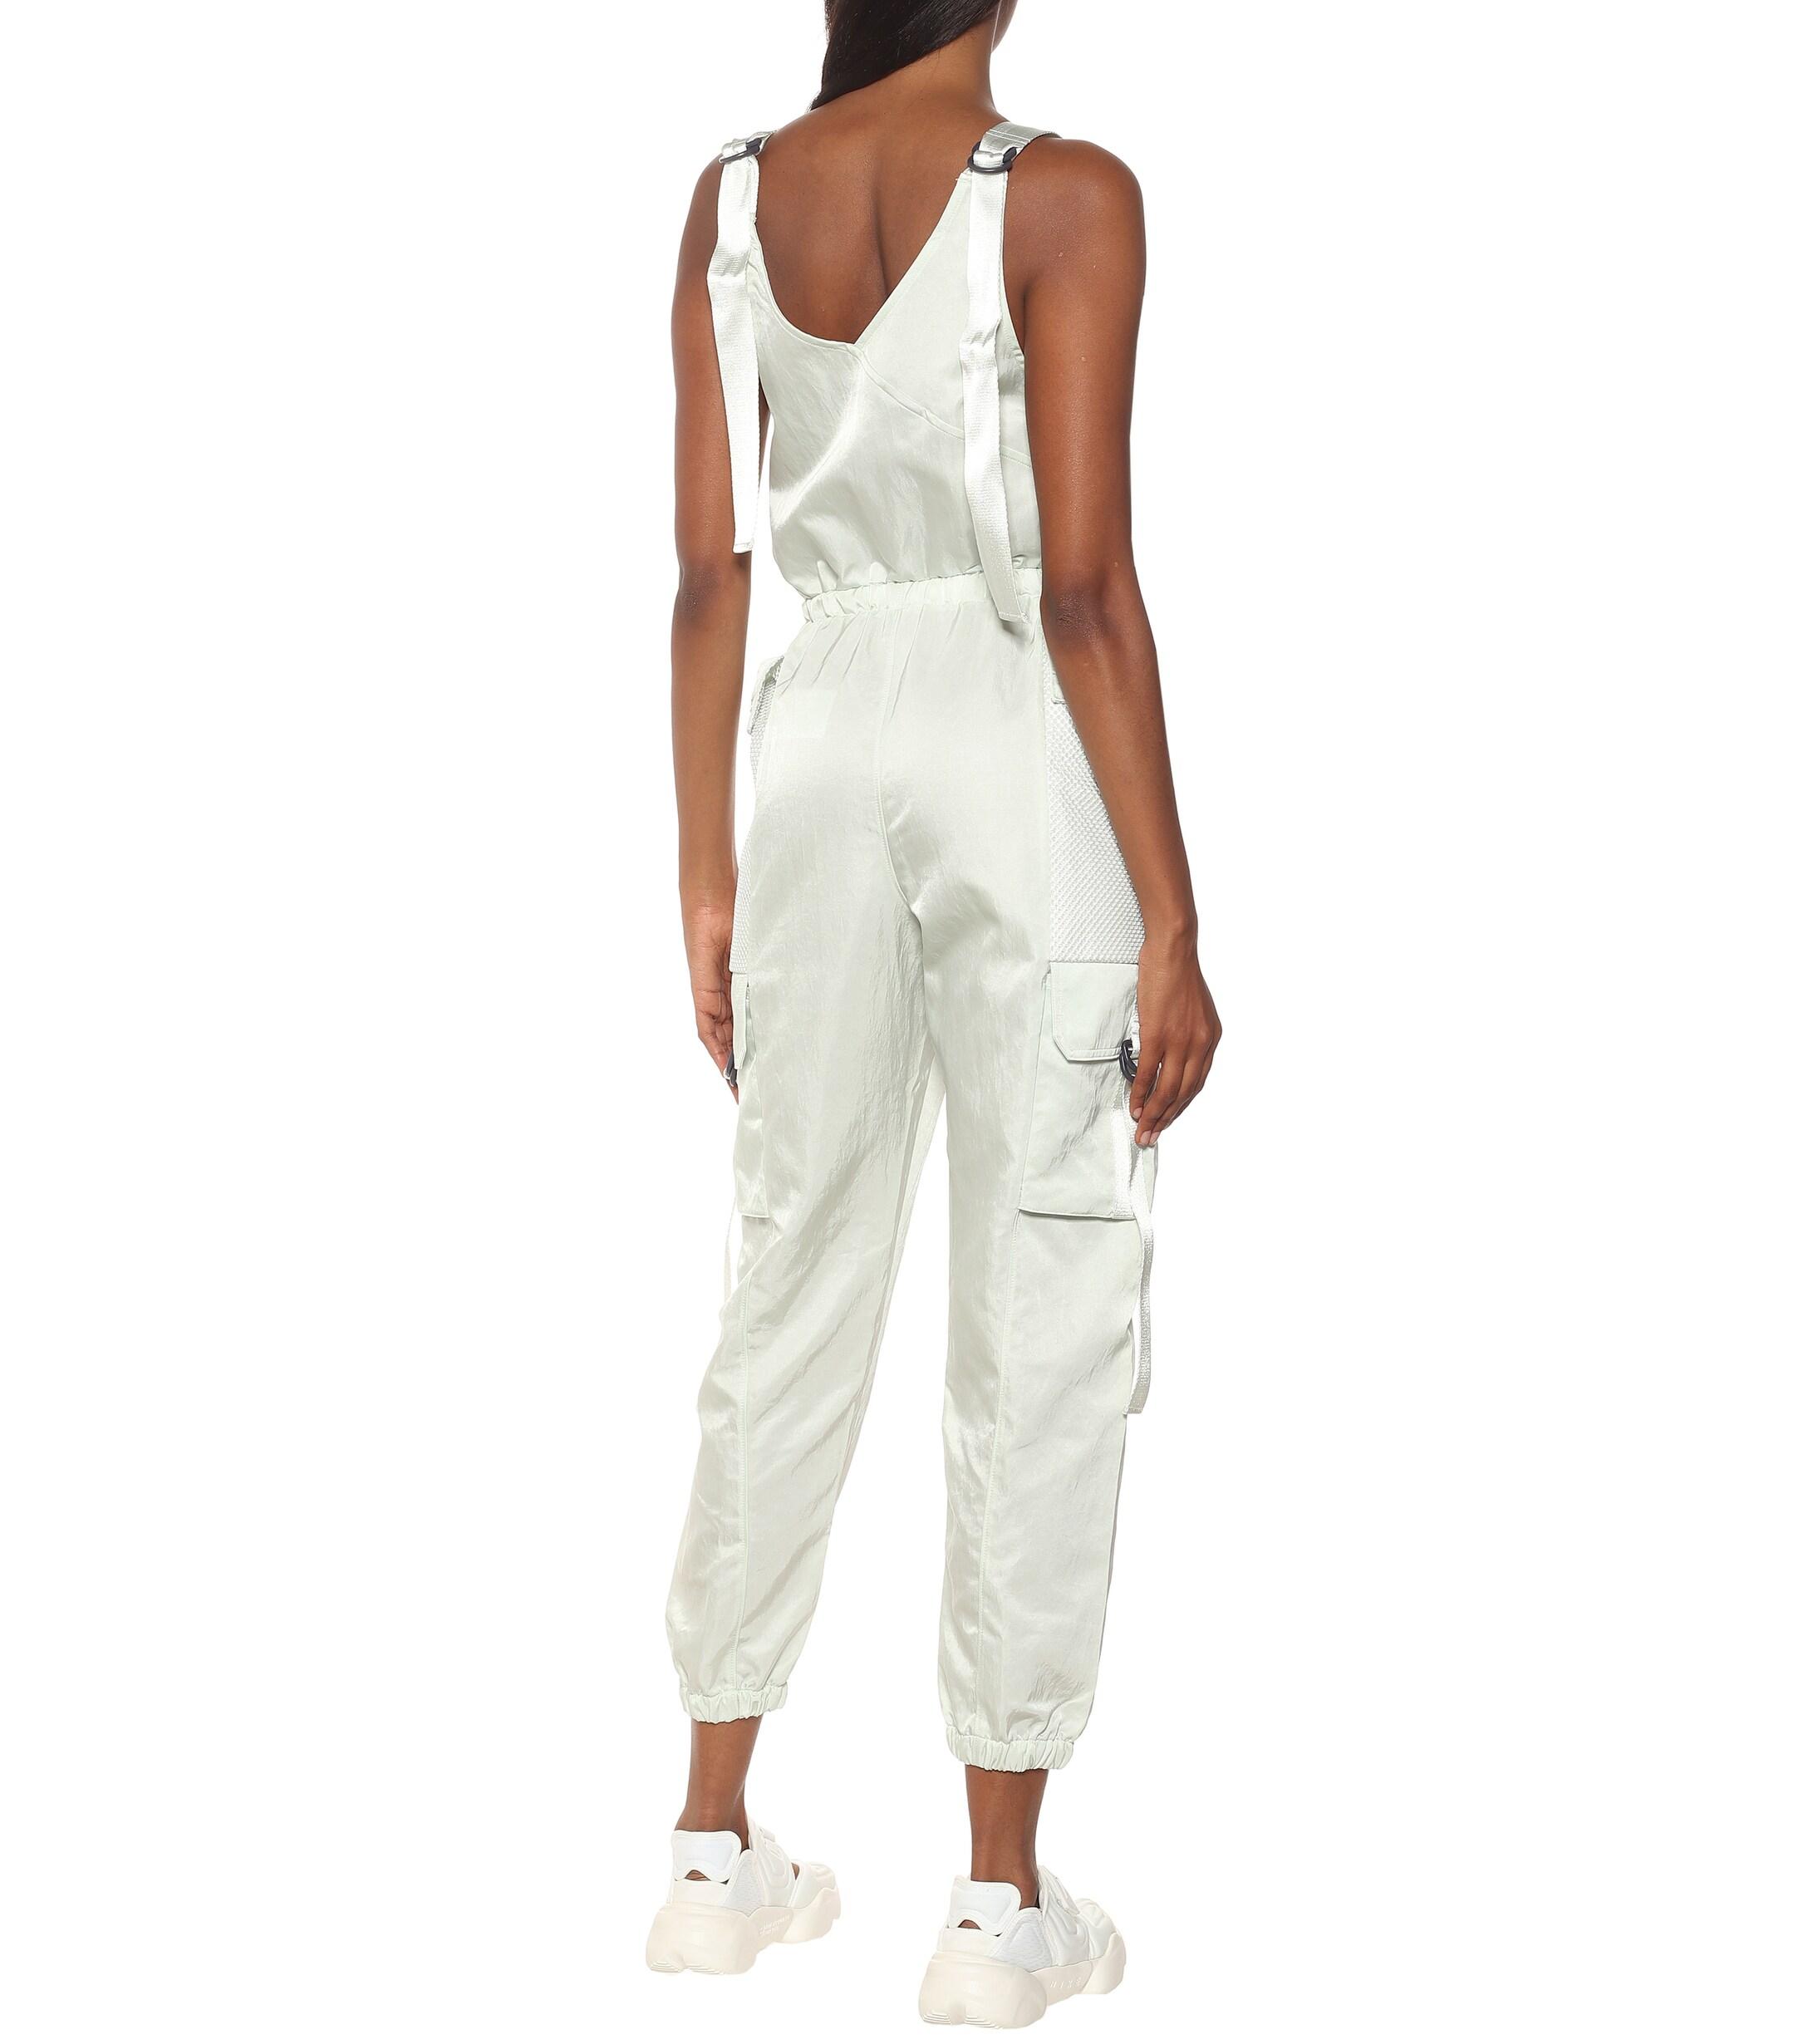 Nike Synthetic Jordan Utility Overalls in White | Lyst